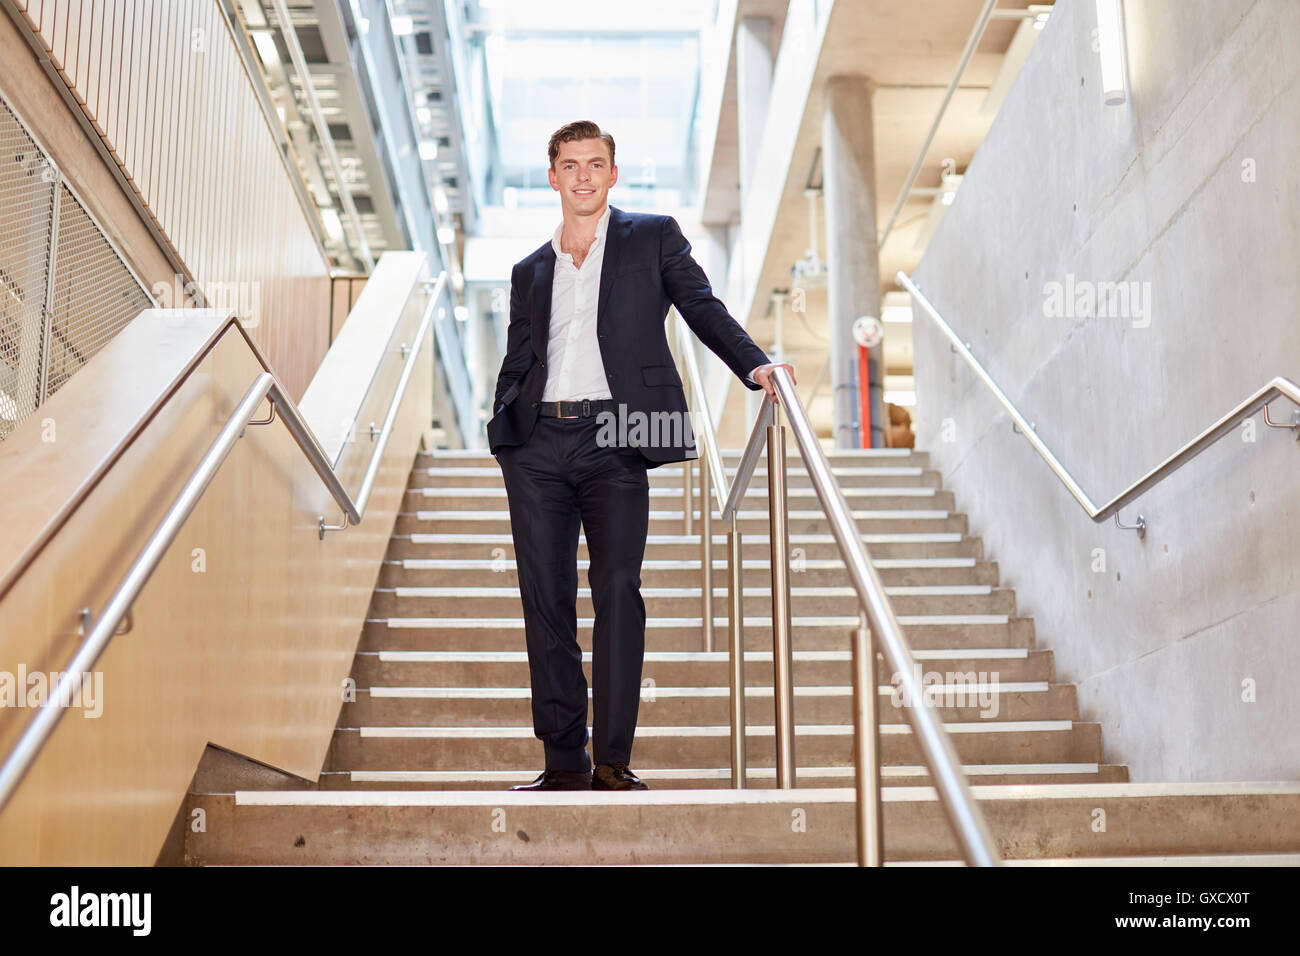 Portrait of young businessman standing on office stairway Banque D'Images